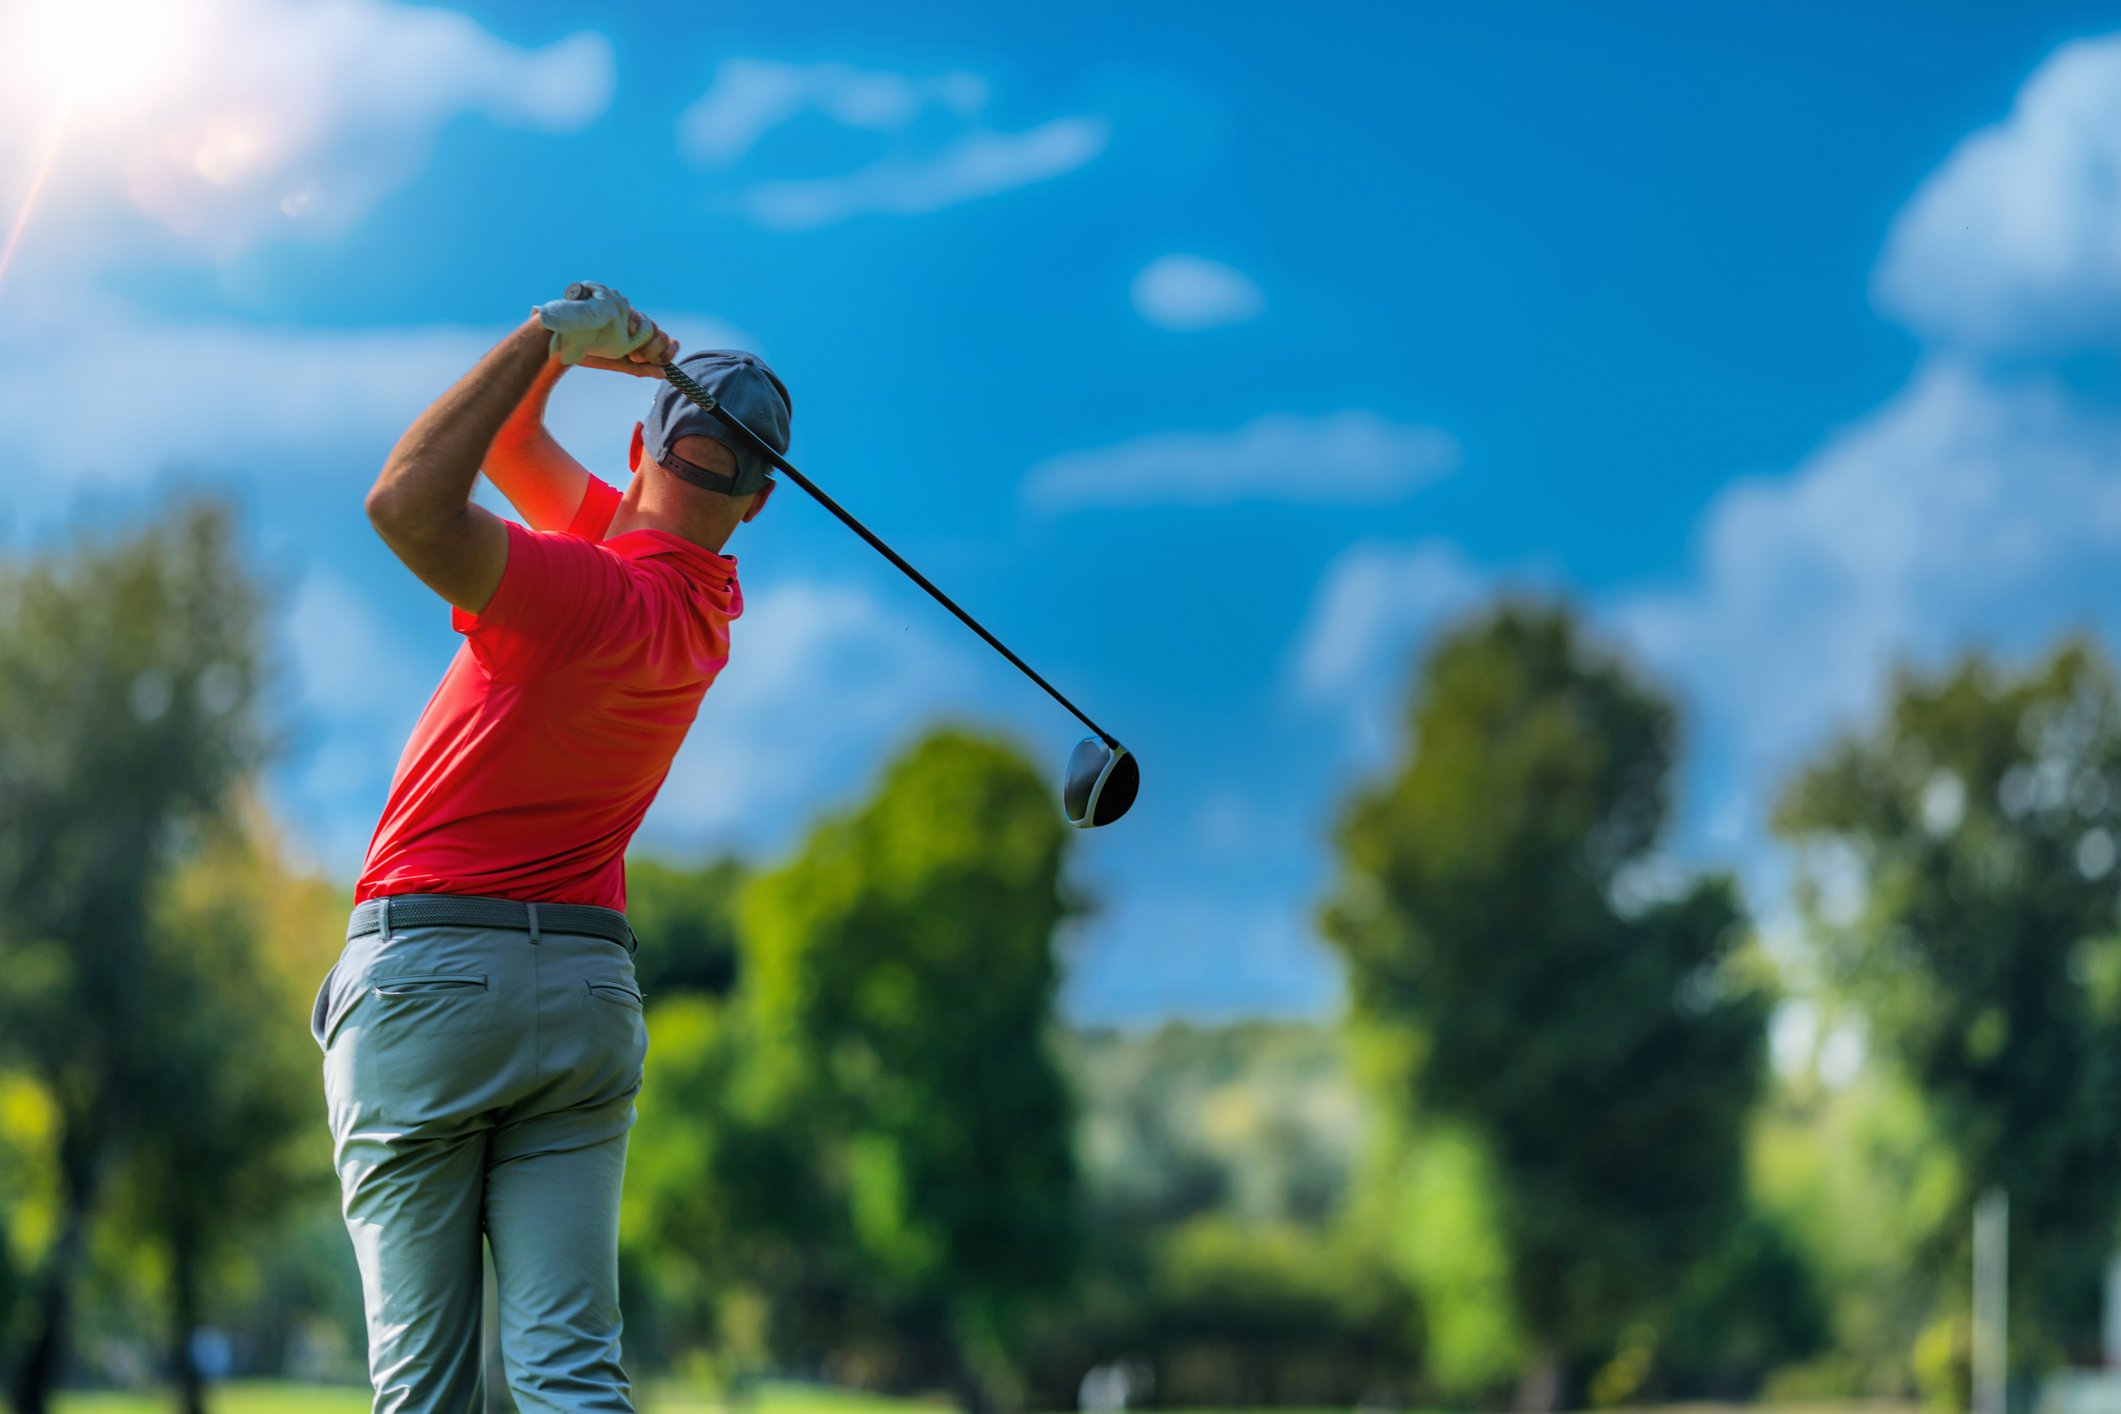 A man wearing a red shirt is playing golf.